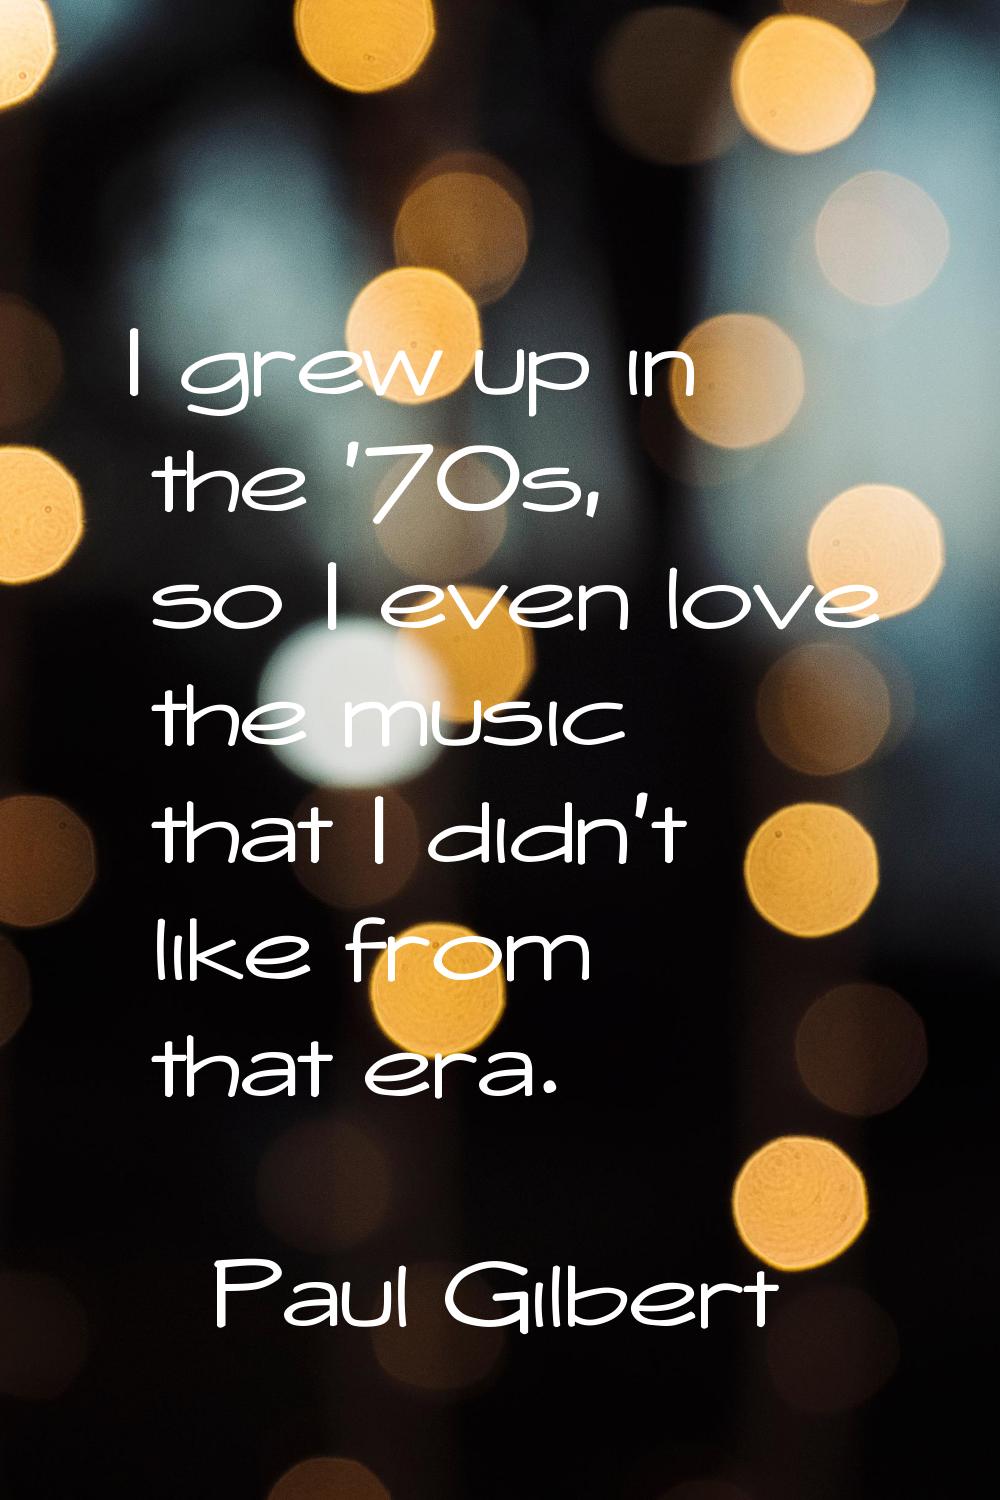 I grew up in the ‘70s, so I even love the music that I didn't like from that era.